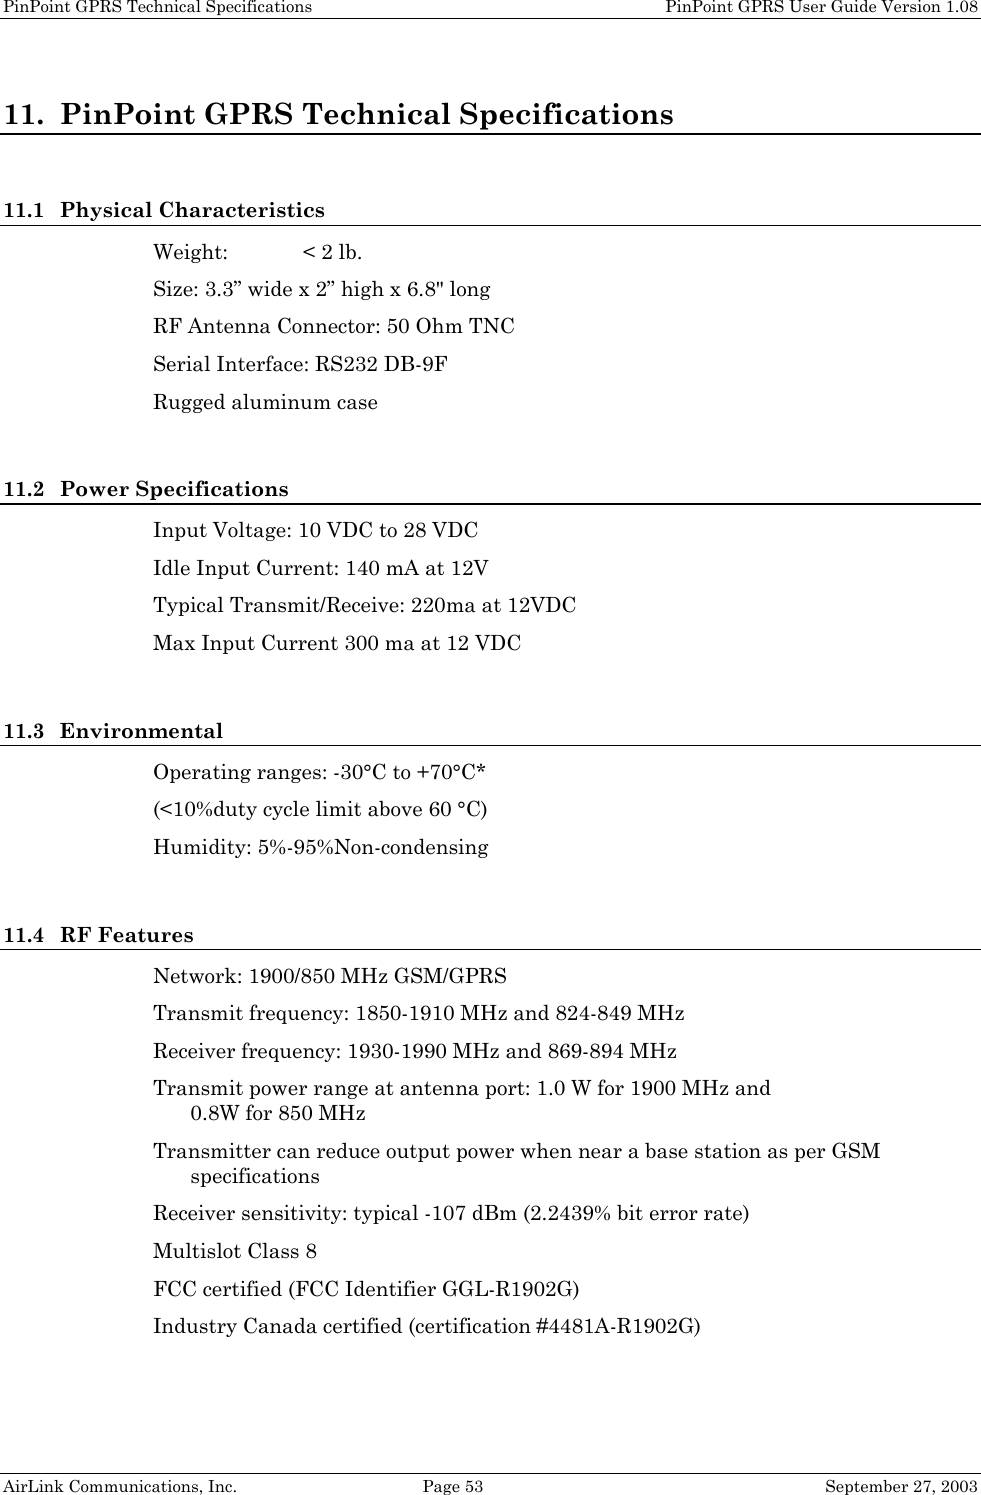 PinPoint GPRS Technical Specifications    PinPoint GPRS User Guide Version 1.08 AirLink Communications, Inc.  Page 53  September 27, 2003 11. PinPoint GPRS Technical Specifications  11.1 Physical Characteristics Weight:  &lt; 2 lb. Size: 3.3” wide x 2” high x 6.8&quot; long  RF Antenna Connector: 50 Ohm TNC Serial Interface: RS232 DB-9F Rugged aluminum case  11.2 Power Specifications Input Voltage: 10 VDC to 28 VDC Idle Input Current: 140 mA at 12V Typical Transmit/Receive: 220ma at 12VDC Max Input Current 300 ma at 12 VDC  11.3 Environmental Operating ranges: -30°C to +70°C* (&lt;10%duty cycle limit above 60 °C) Humidity: 5%-95%Non-condensing  11.4 RF Features Network: 1900/850 MHz GSM/GPRS Transmit frequency: 1850-1910 MHz and 824-849 MHz Receiver frequency: 1930-1990 MHz and 869-894 MHz Transmit power range at antenna port: 1.0 W for 1900 MHz and  0.8W for 850 MHz Transmitter can reduce output power when near a base station as per GSM specifications Receiver sensitivity: typical -107 dBm (2.2439% bit error rate) Multislot Class 8 FCC certified (FCC Identifier GGL-R1902G) Industry Canada certified (certification #4481A-R1902G) 